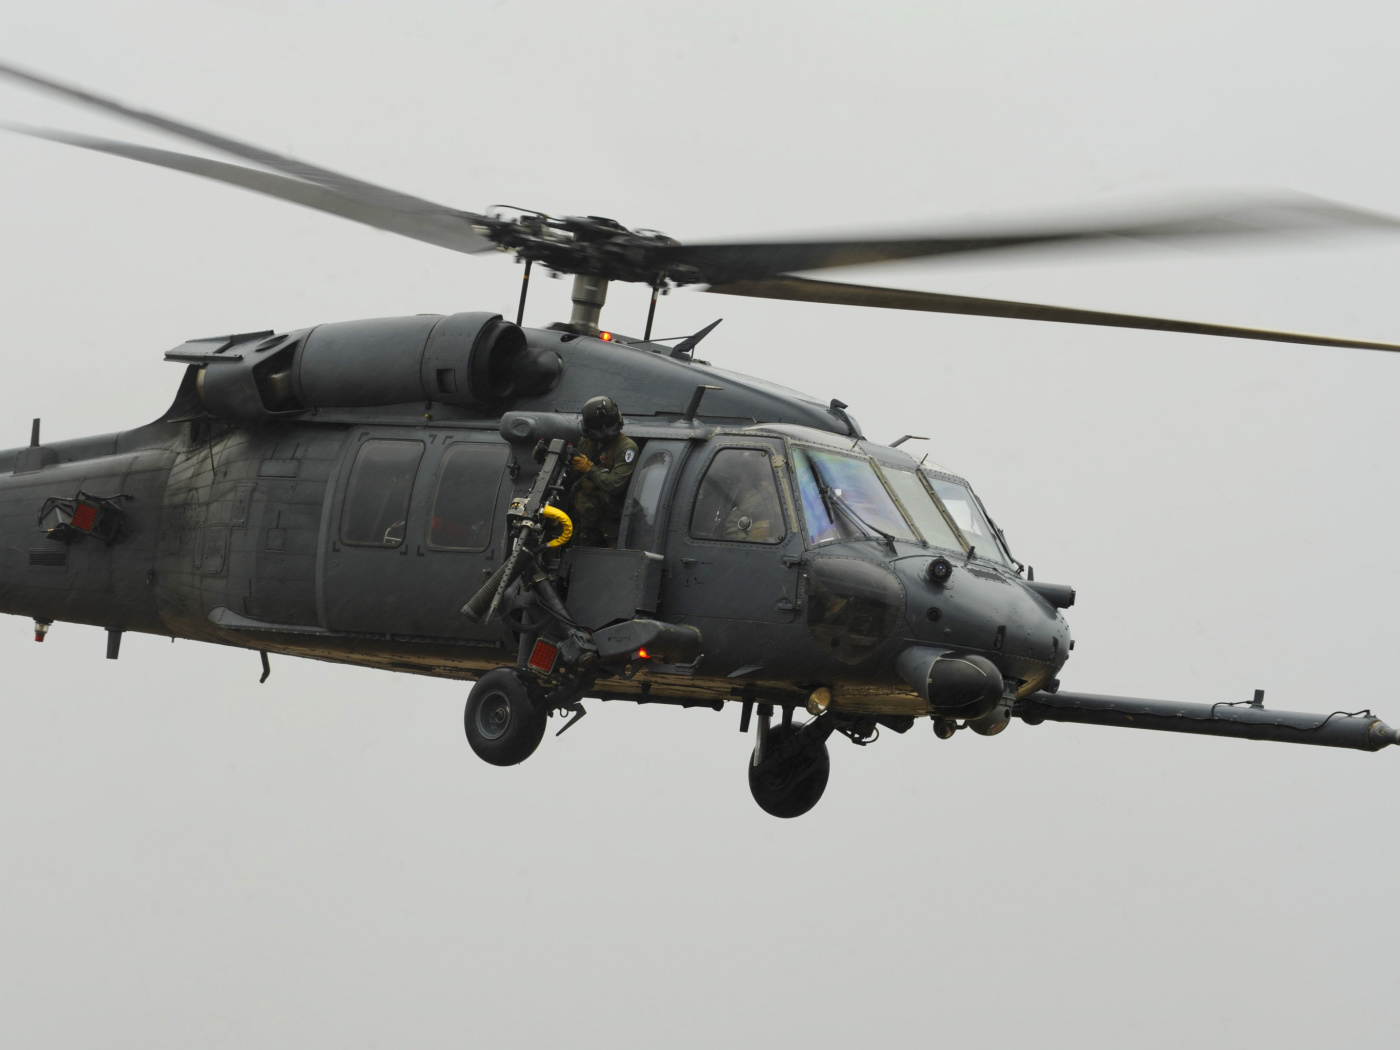 Helicopter Sikorsky HH 60 Pave Hawk wallpaper 1400x1050